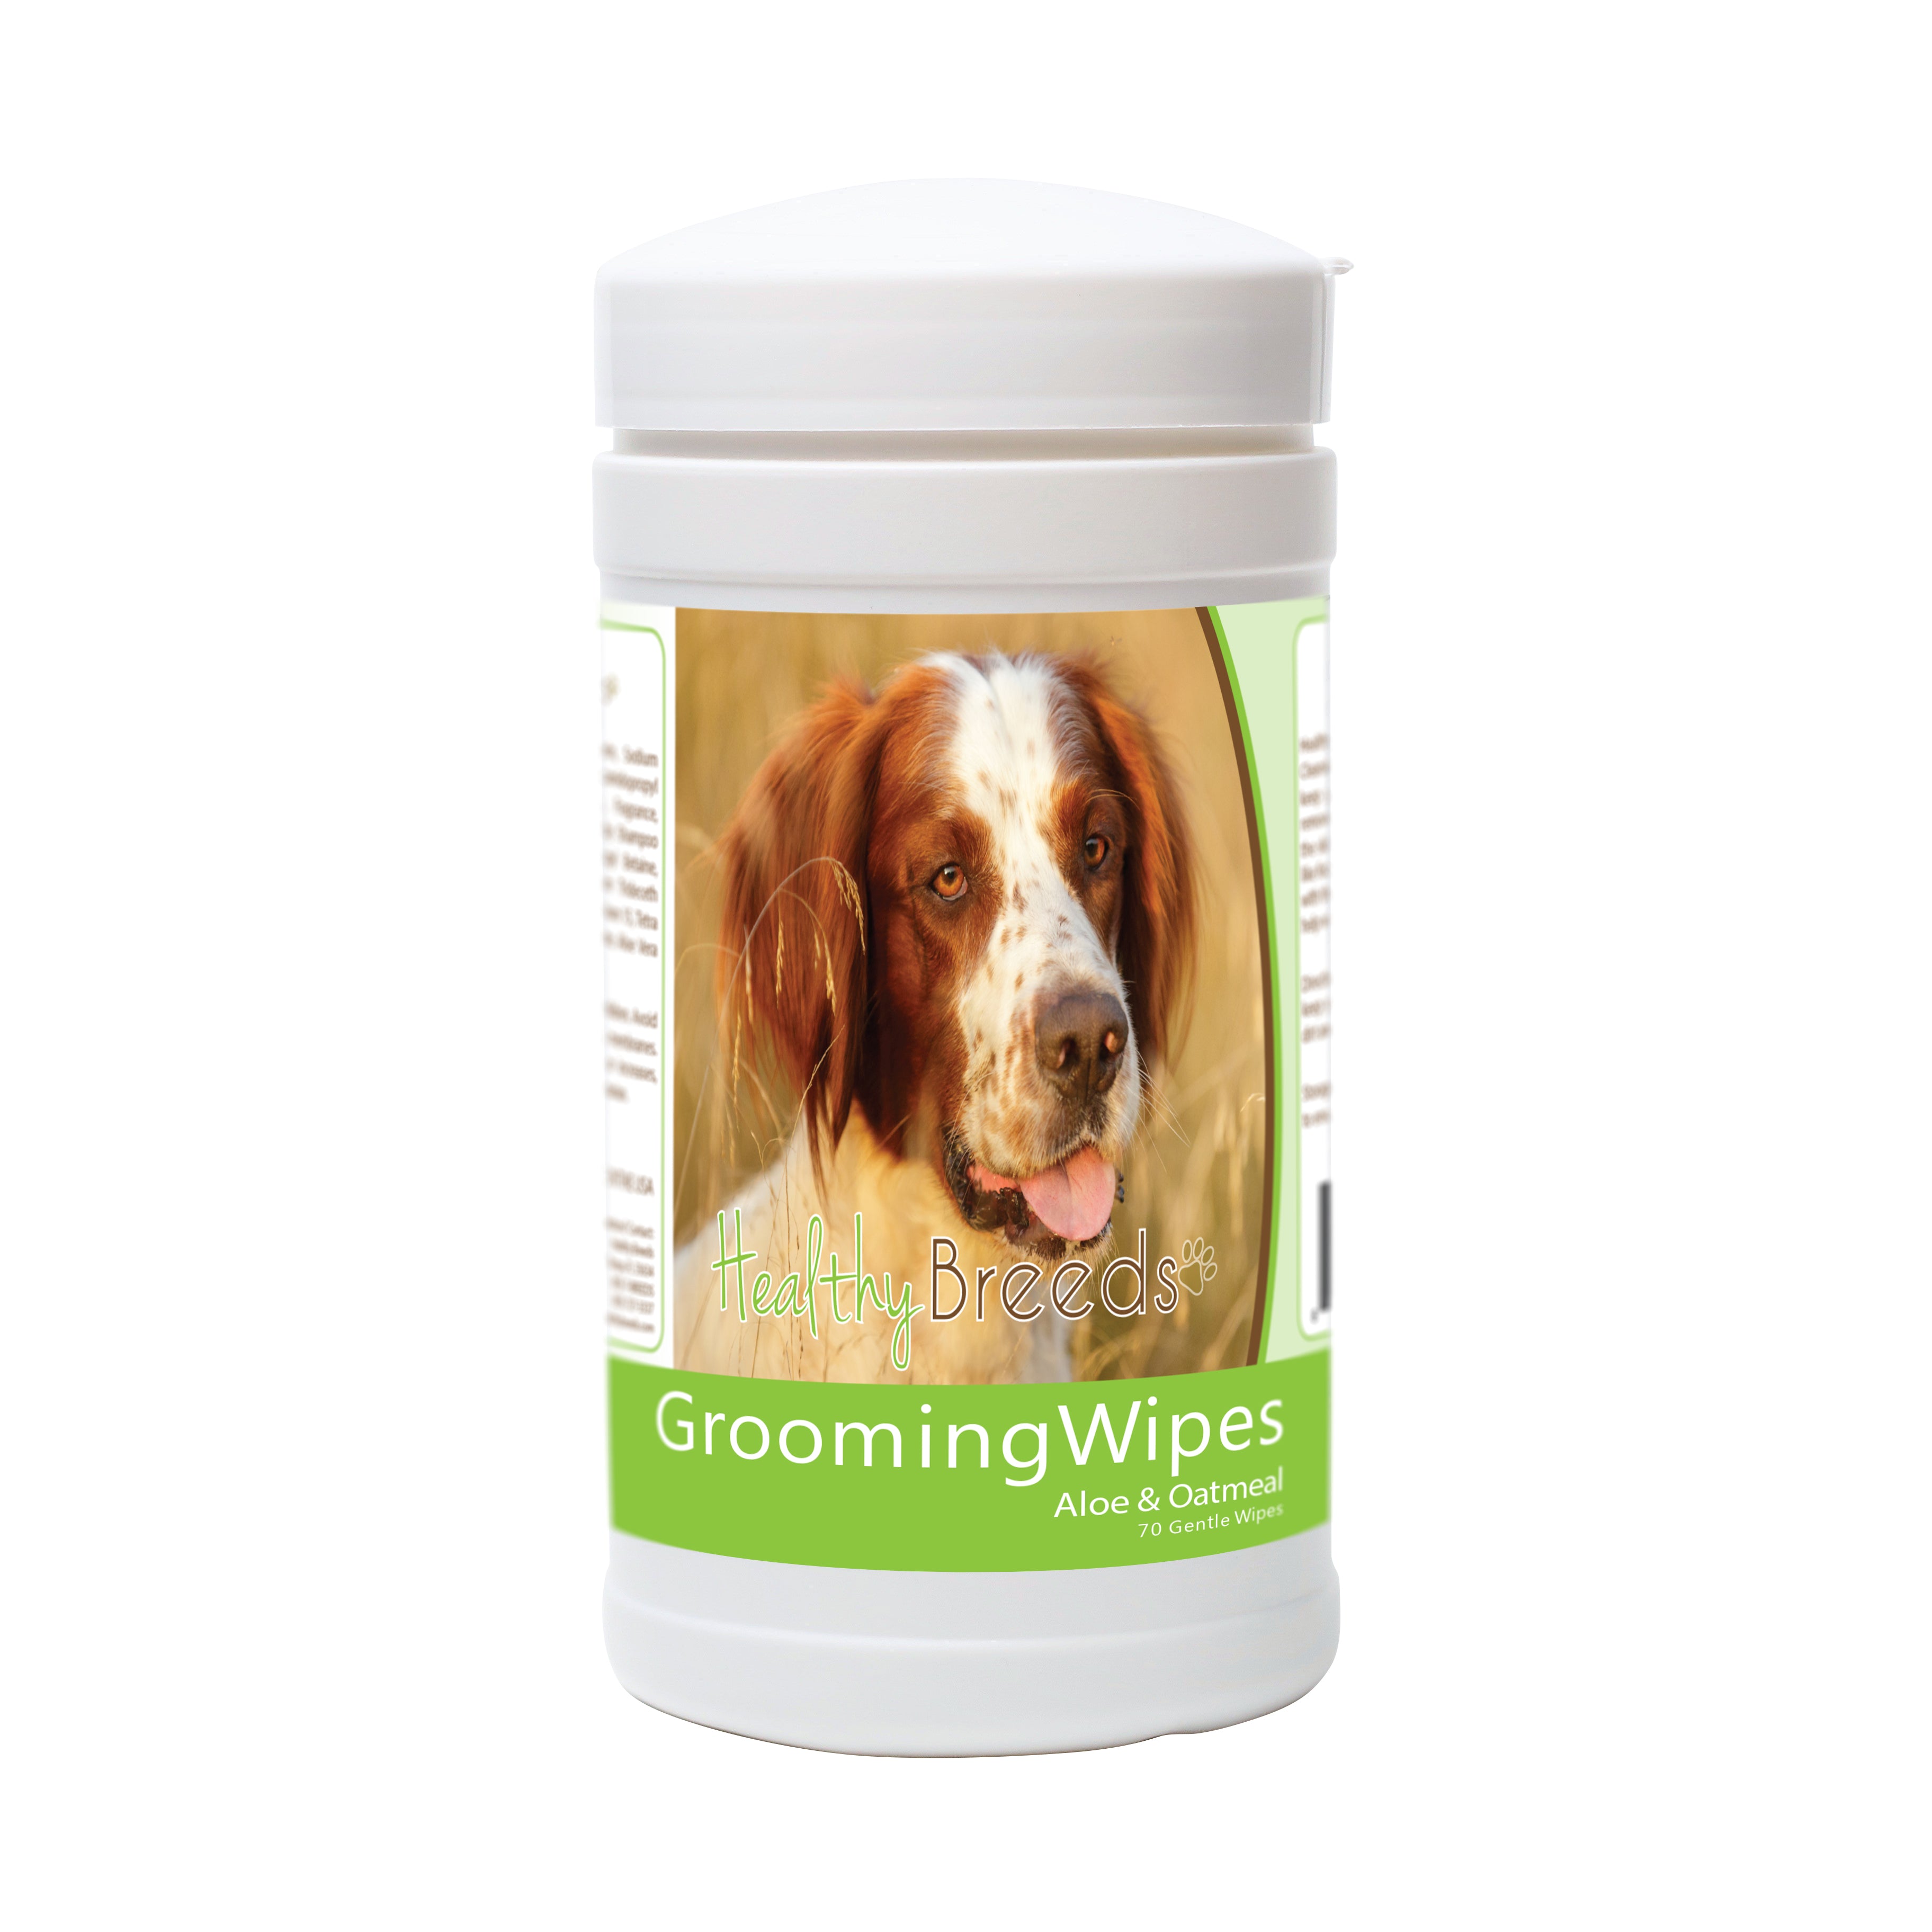 Irish Red and White Setter Grooming Wipes 70 Count